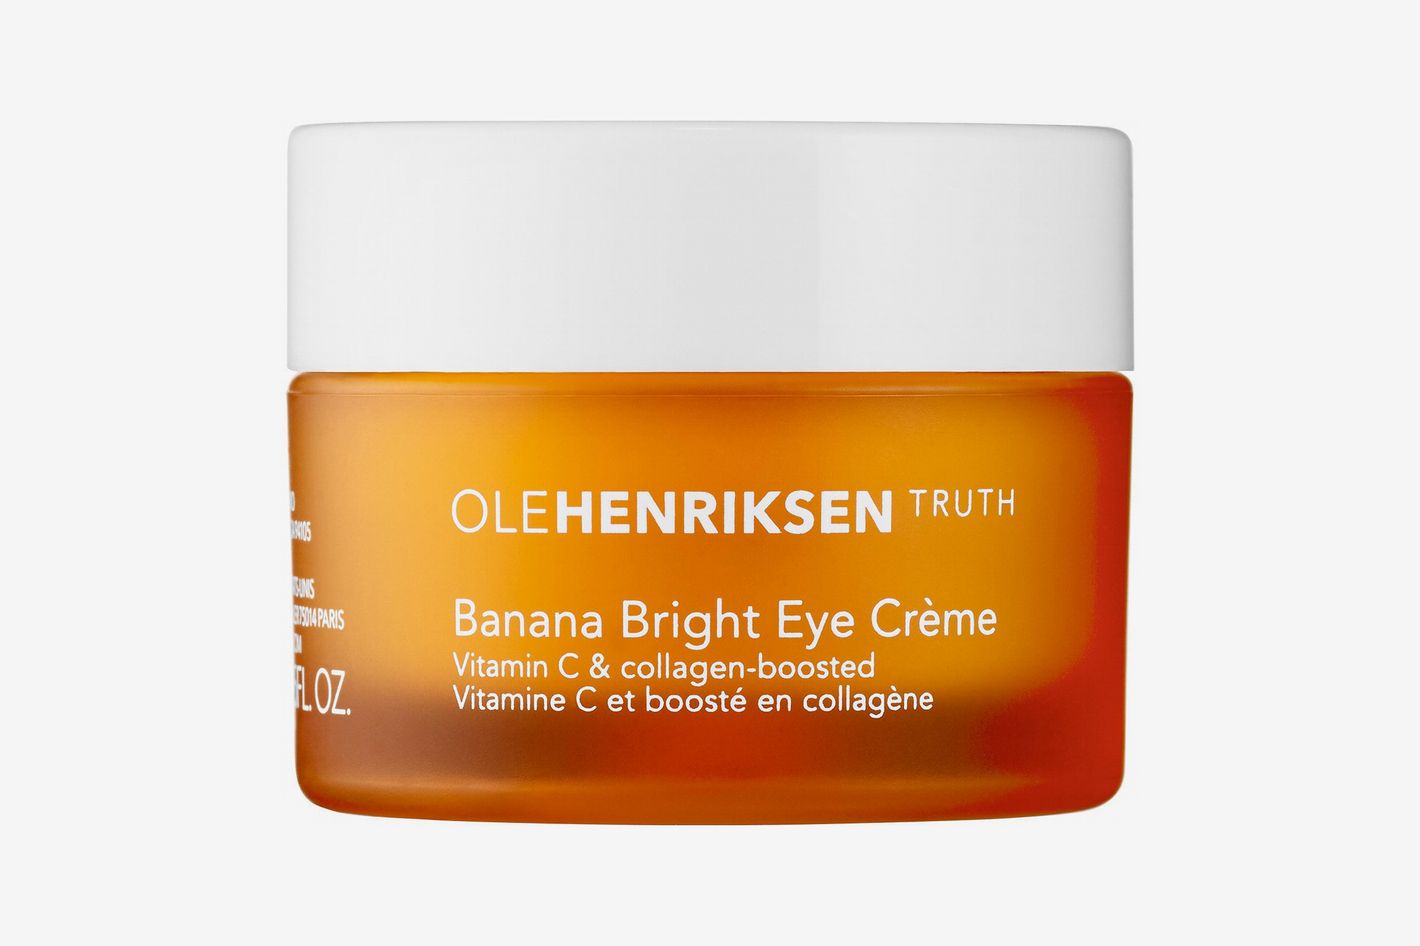 Ole Henriksen's New Banana Bright Eye Crème Is Already Sold Out